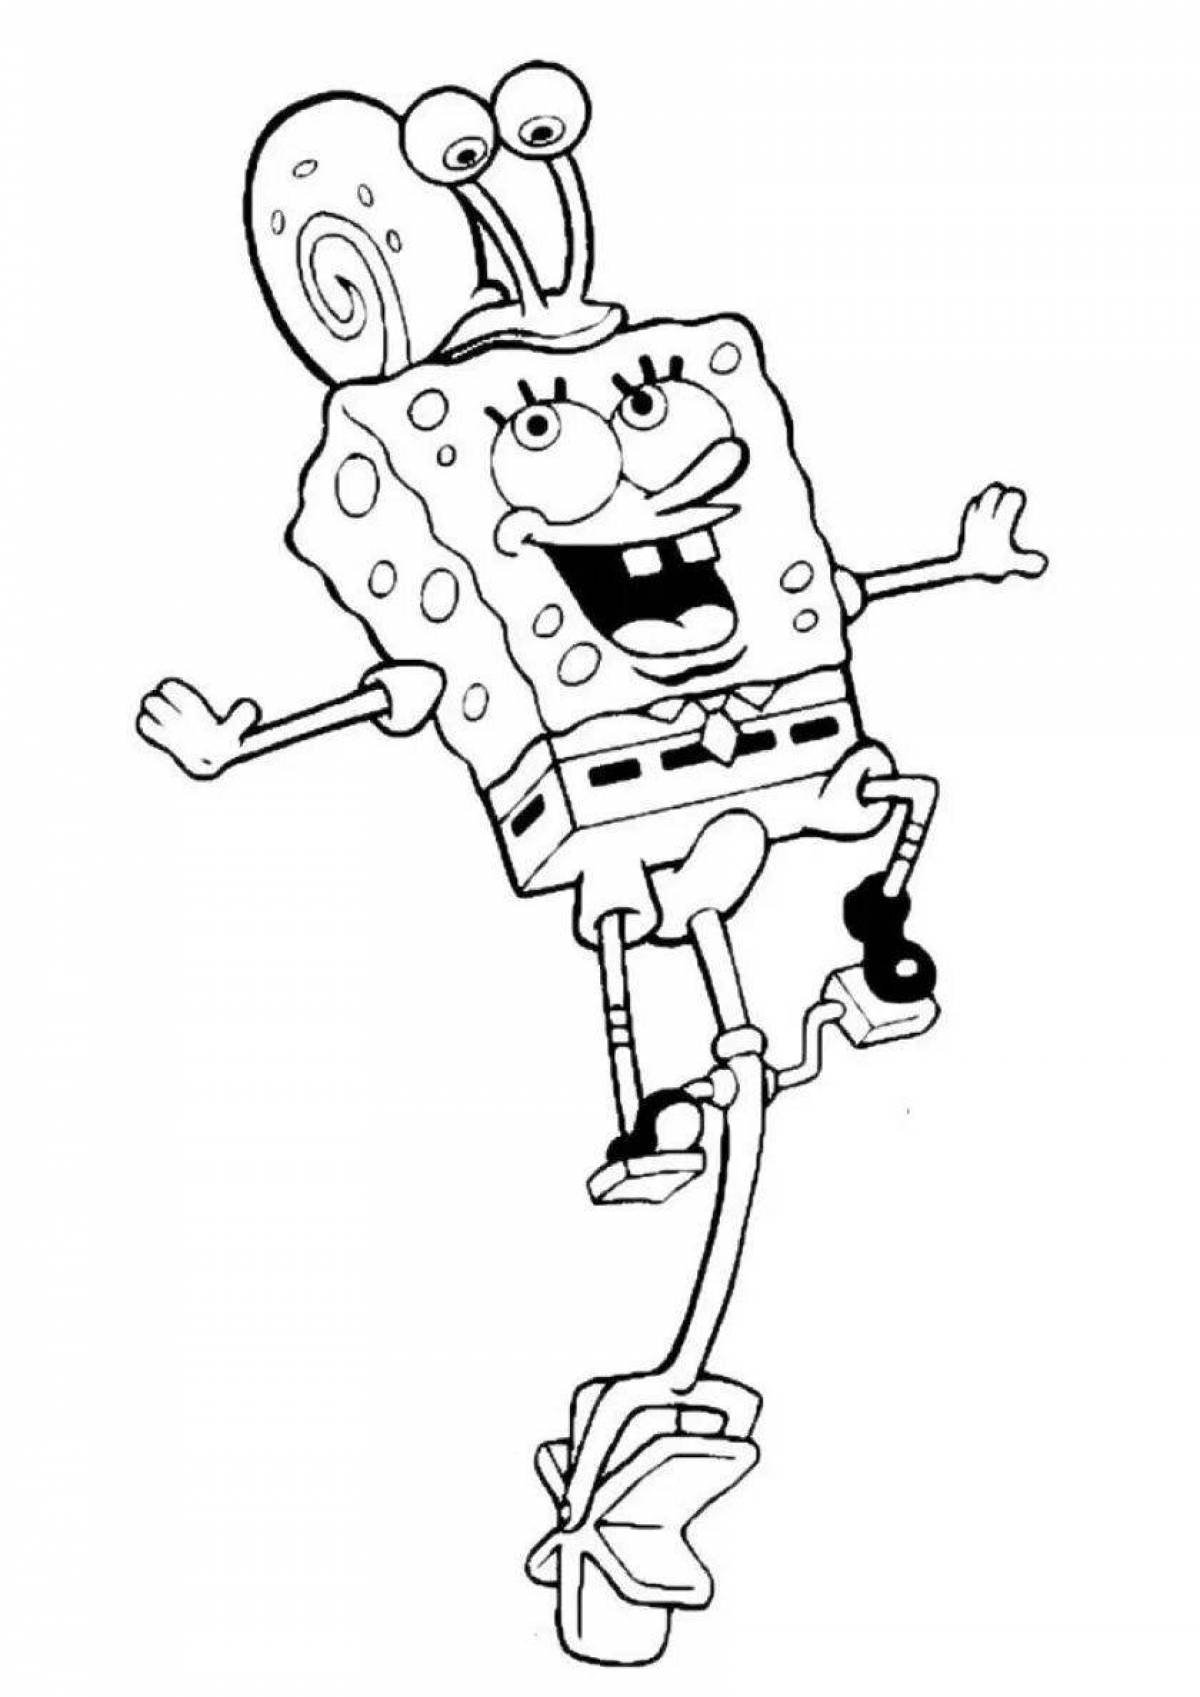 Coloring spongebob with colorful imagination